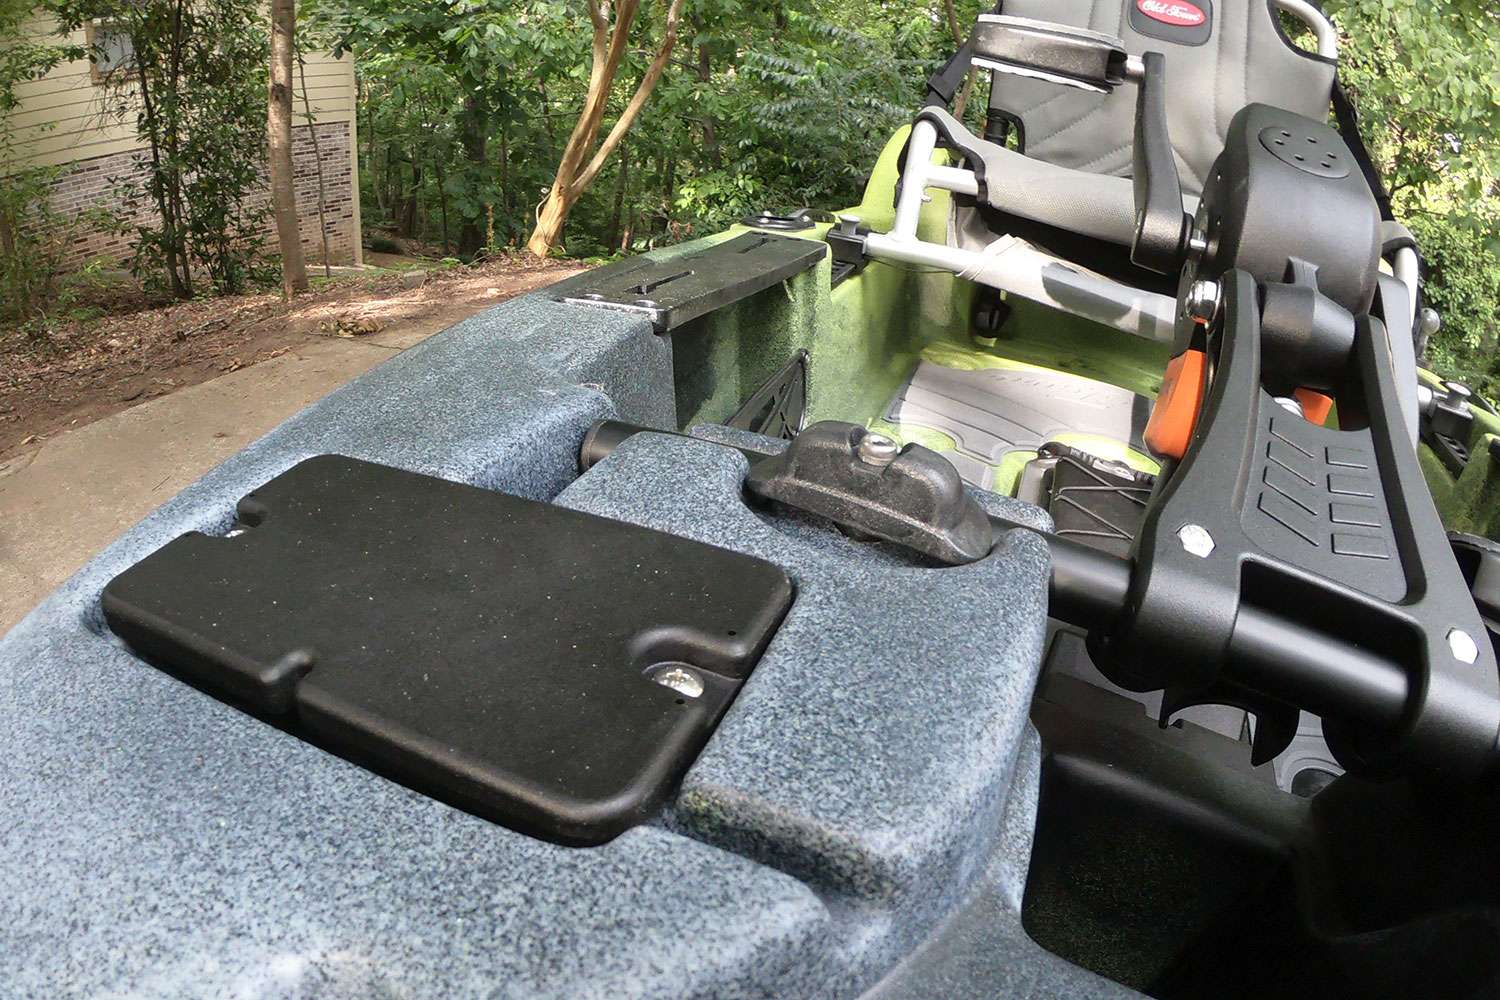 To the front of the PDL are two durable plates that can handle additional accessories.